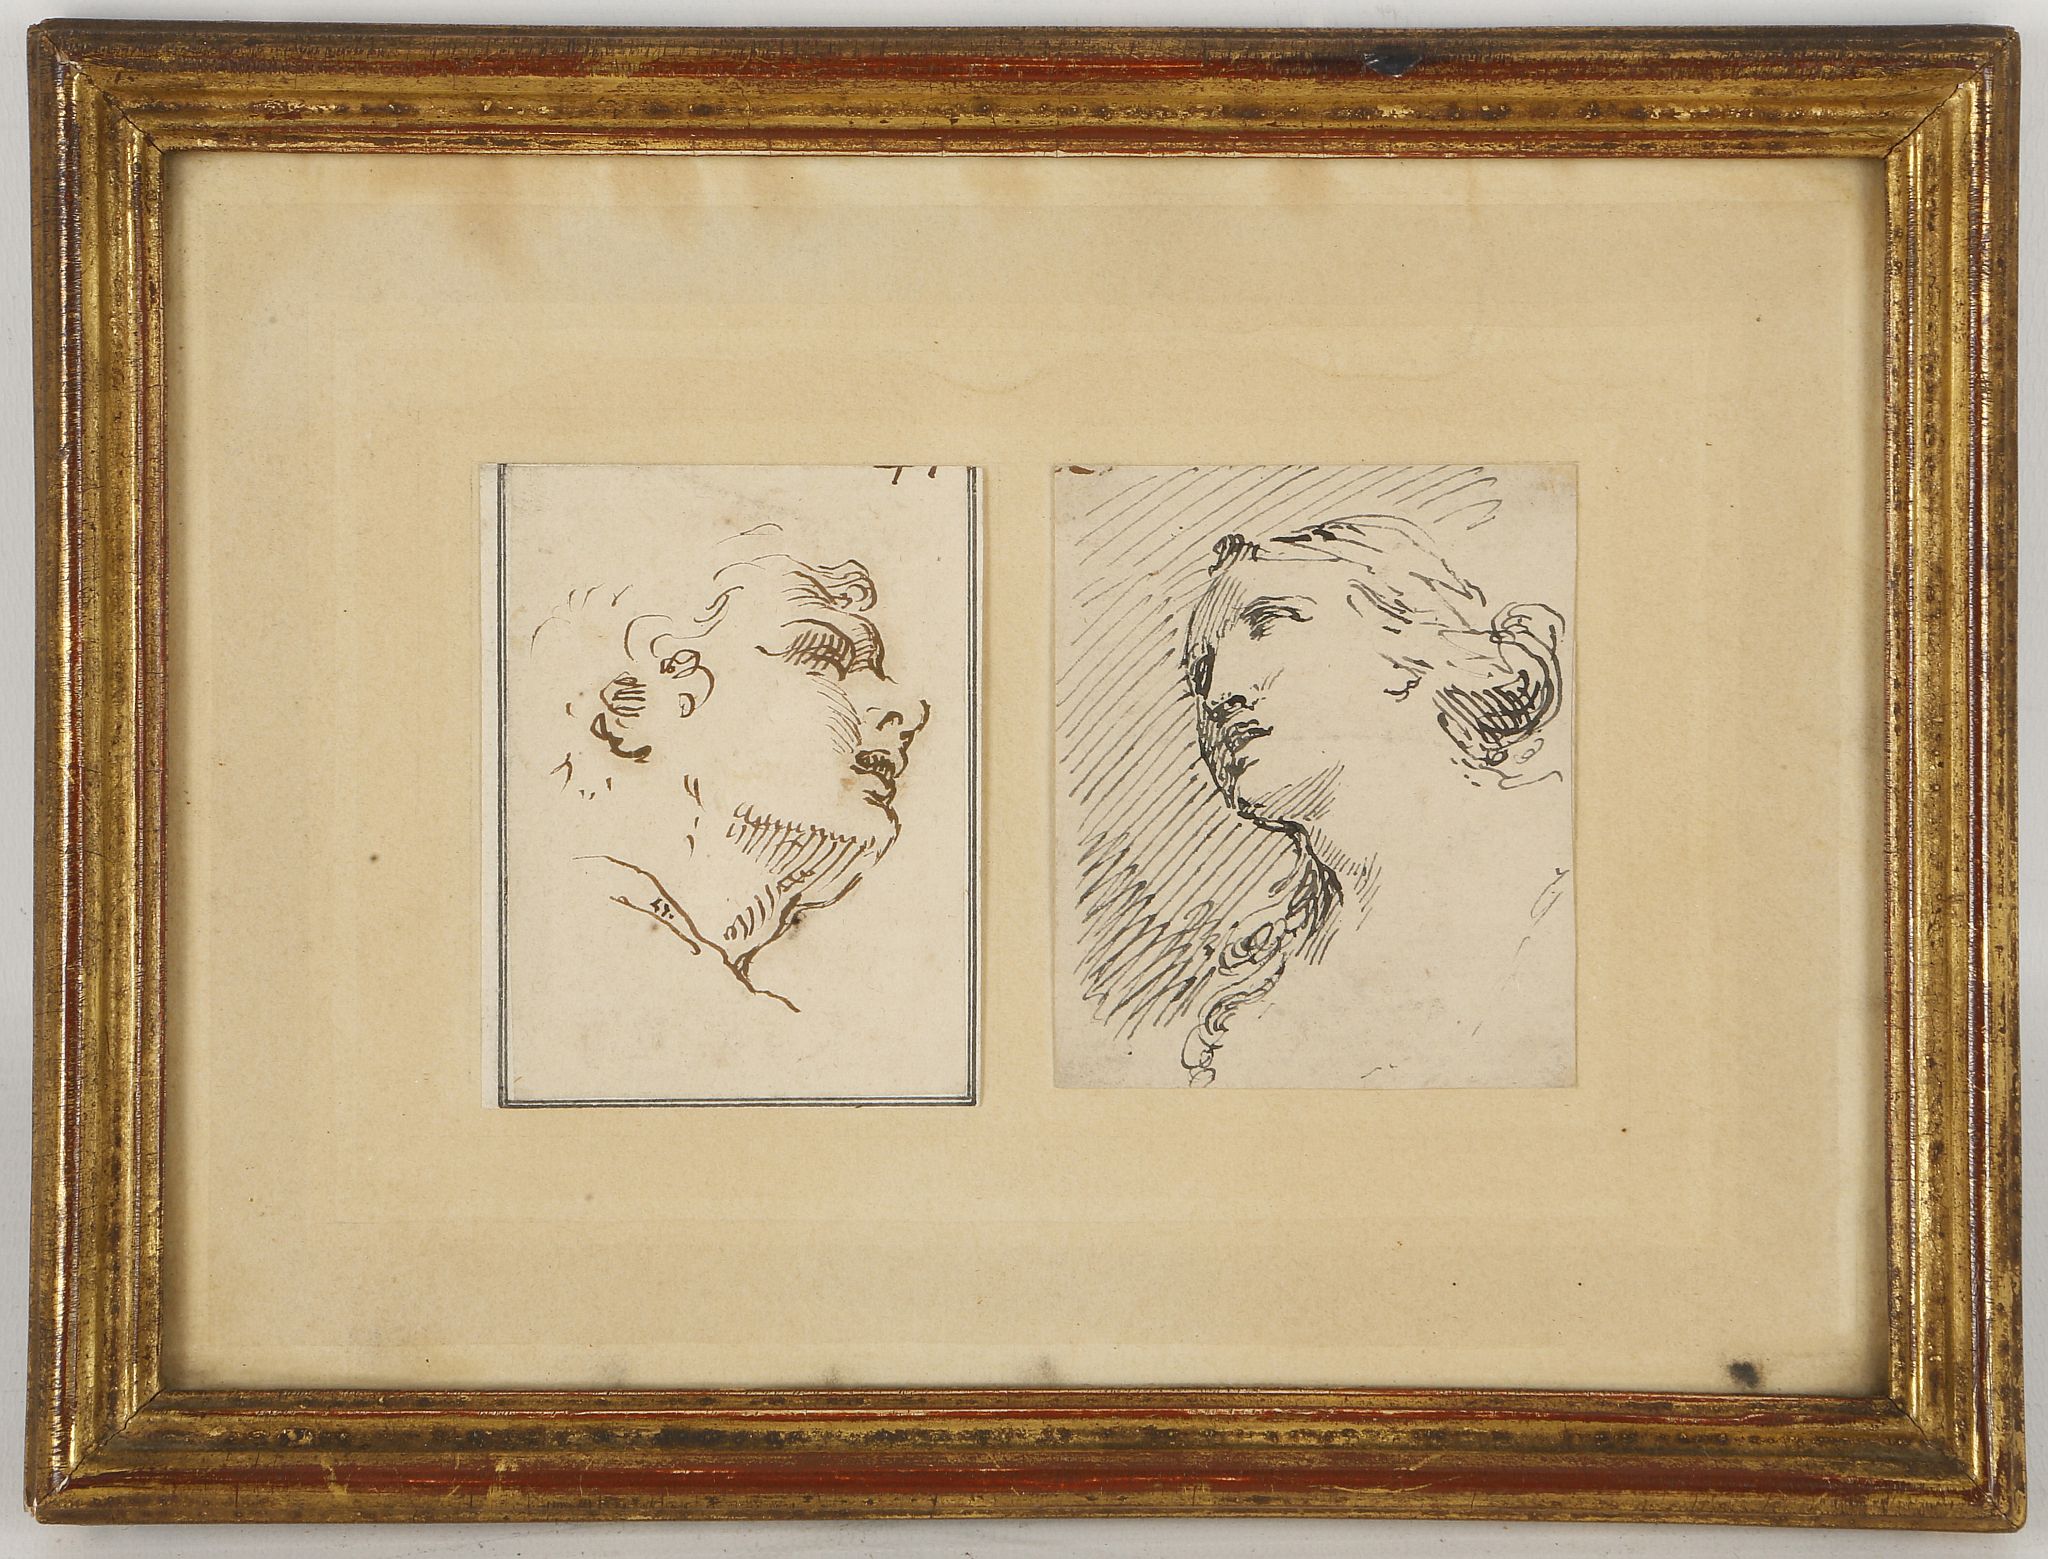 Attributed to Pietro Novella 1603-1647, Italian. A framed pair of pen and ink portraits, male